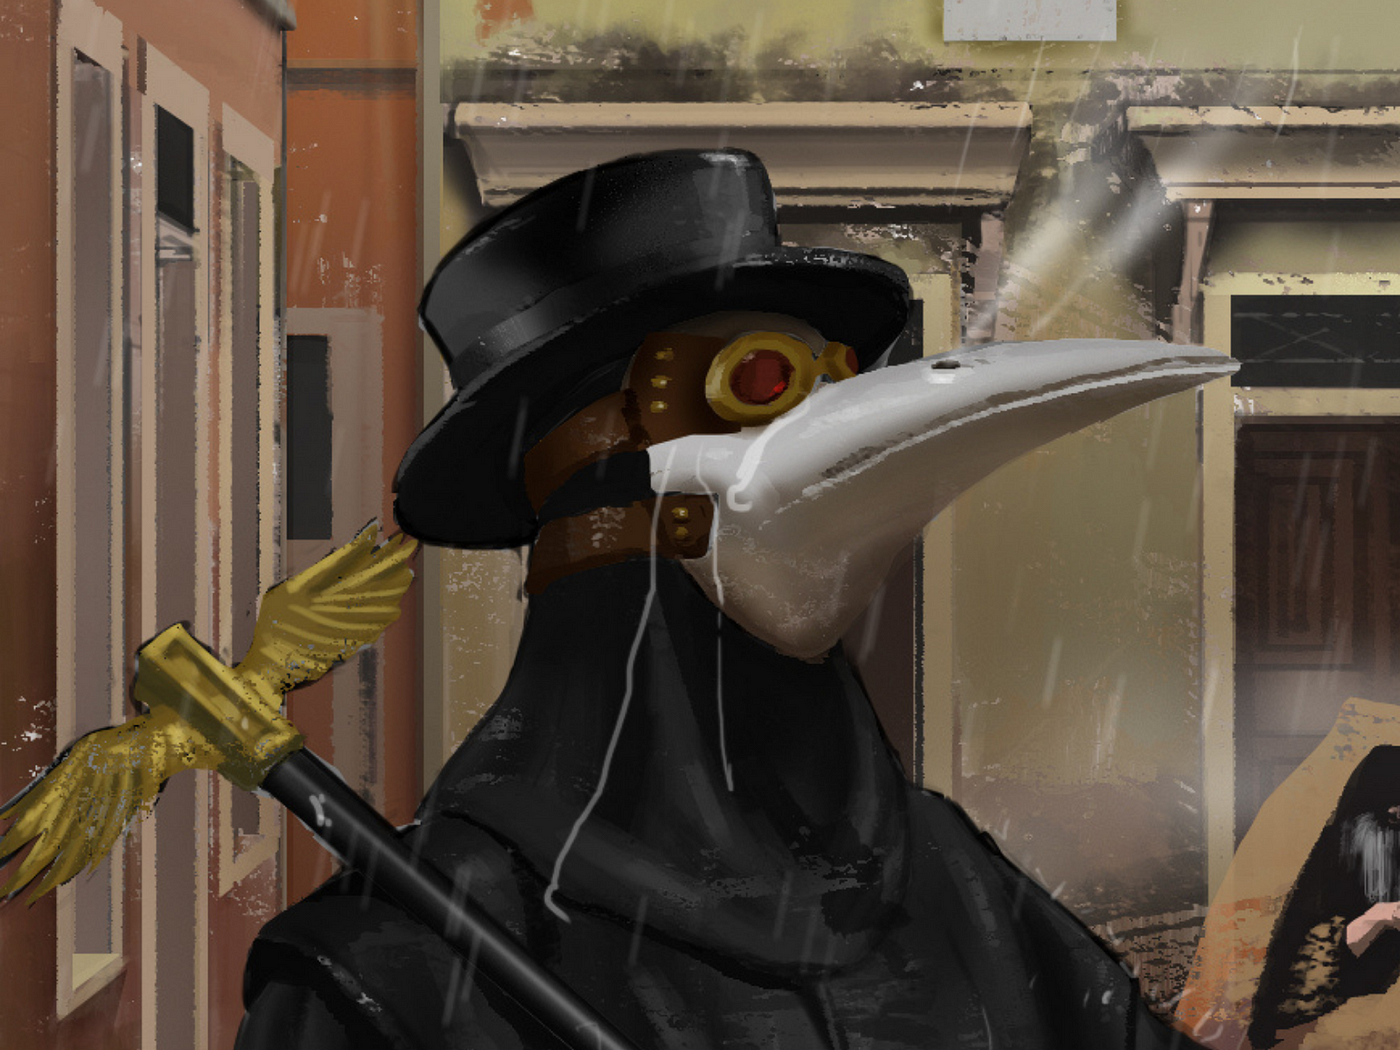 How the Plague Doctor's Worked by Dhamza Tiestos | Medium